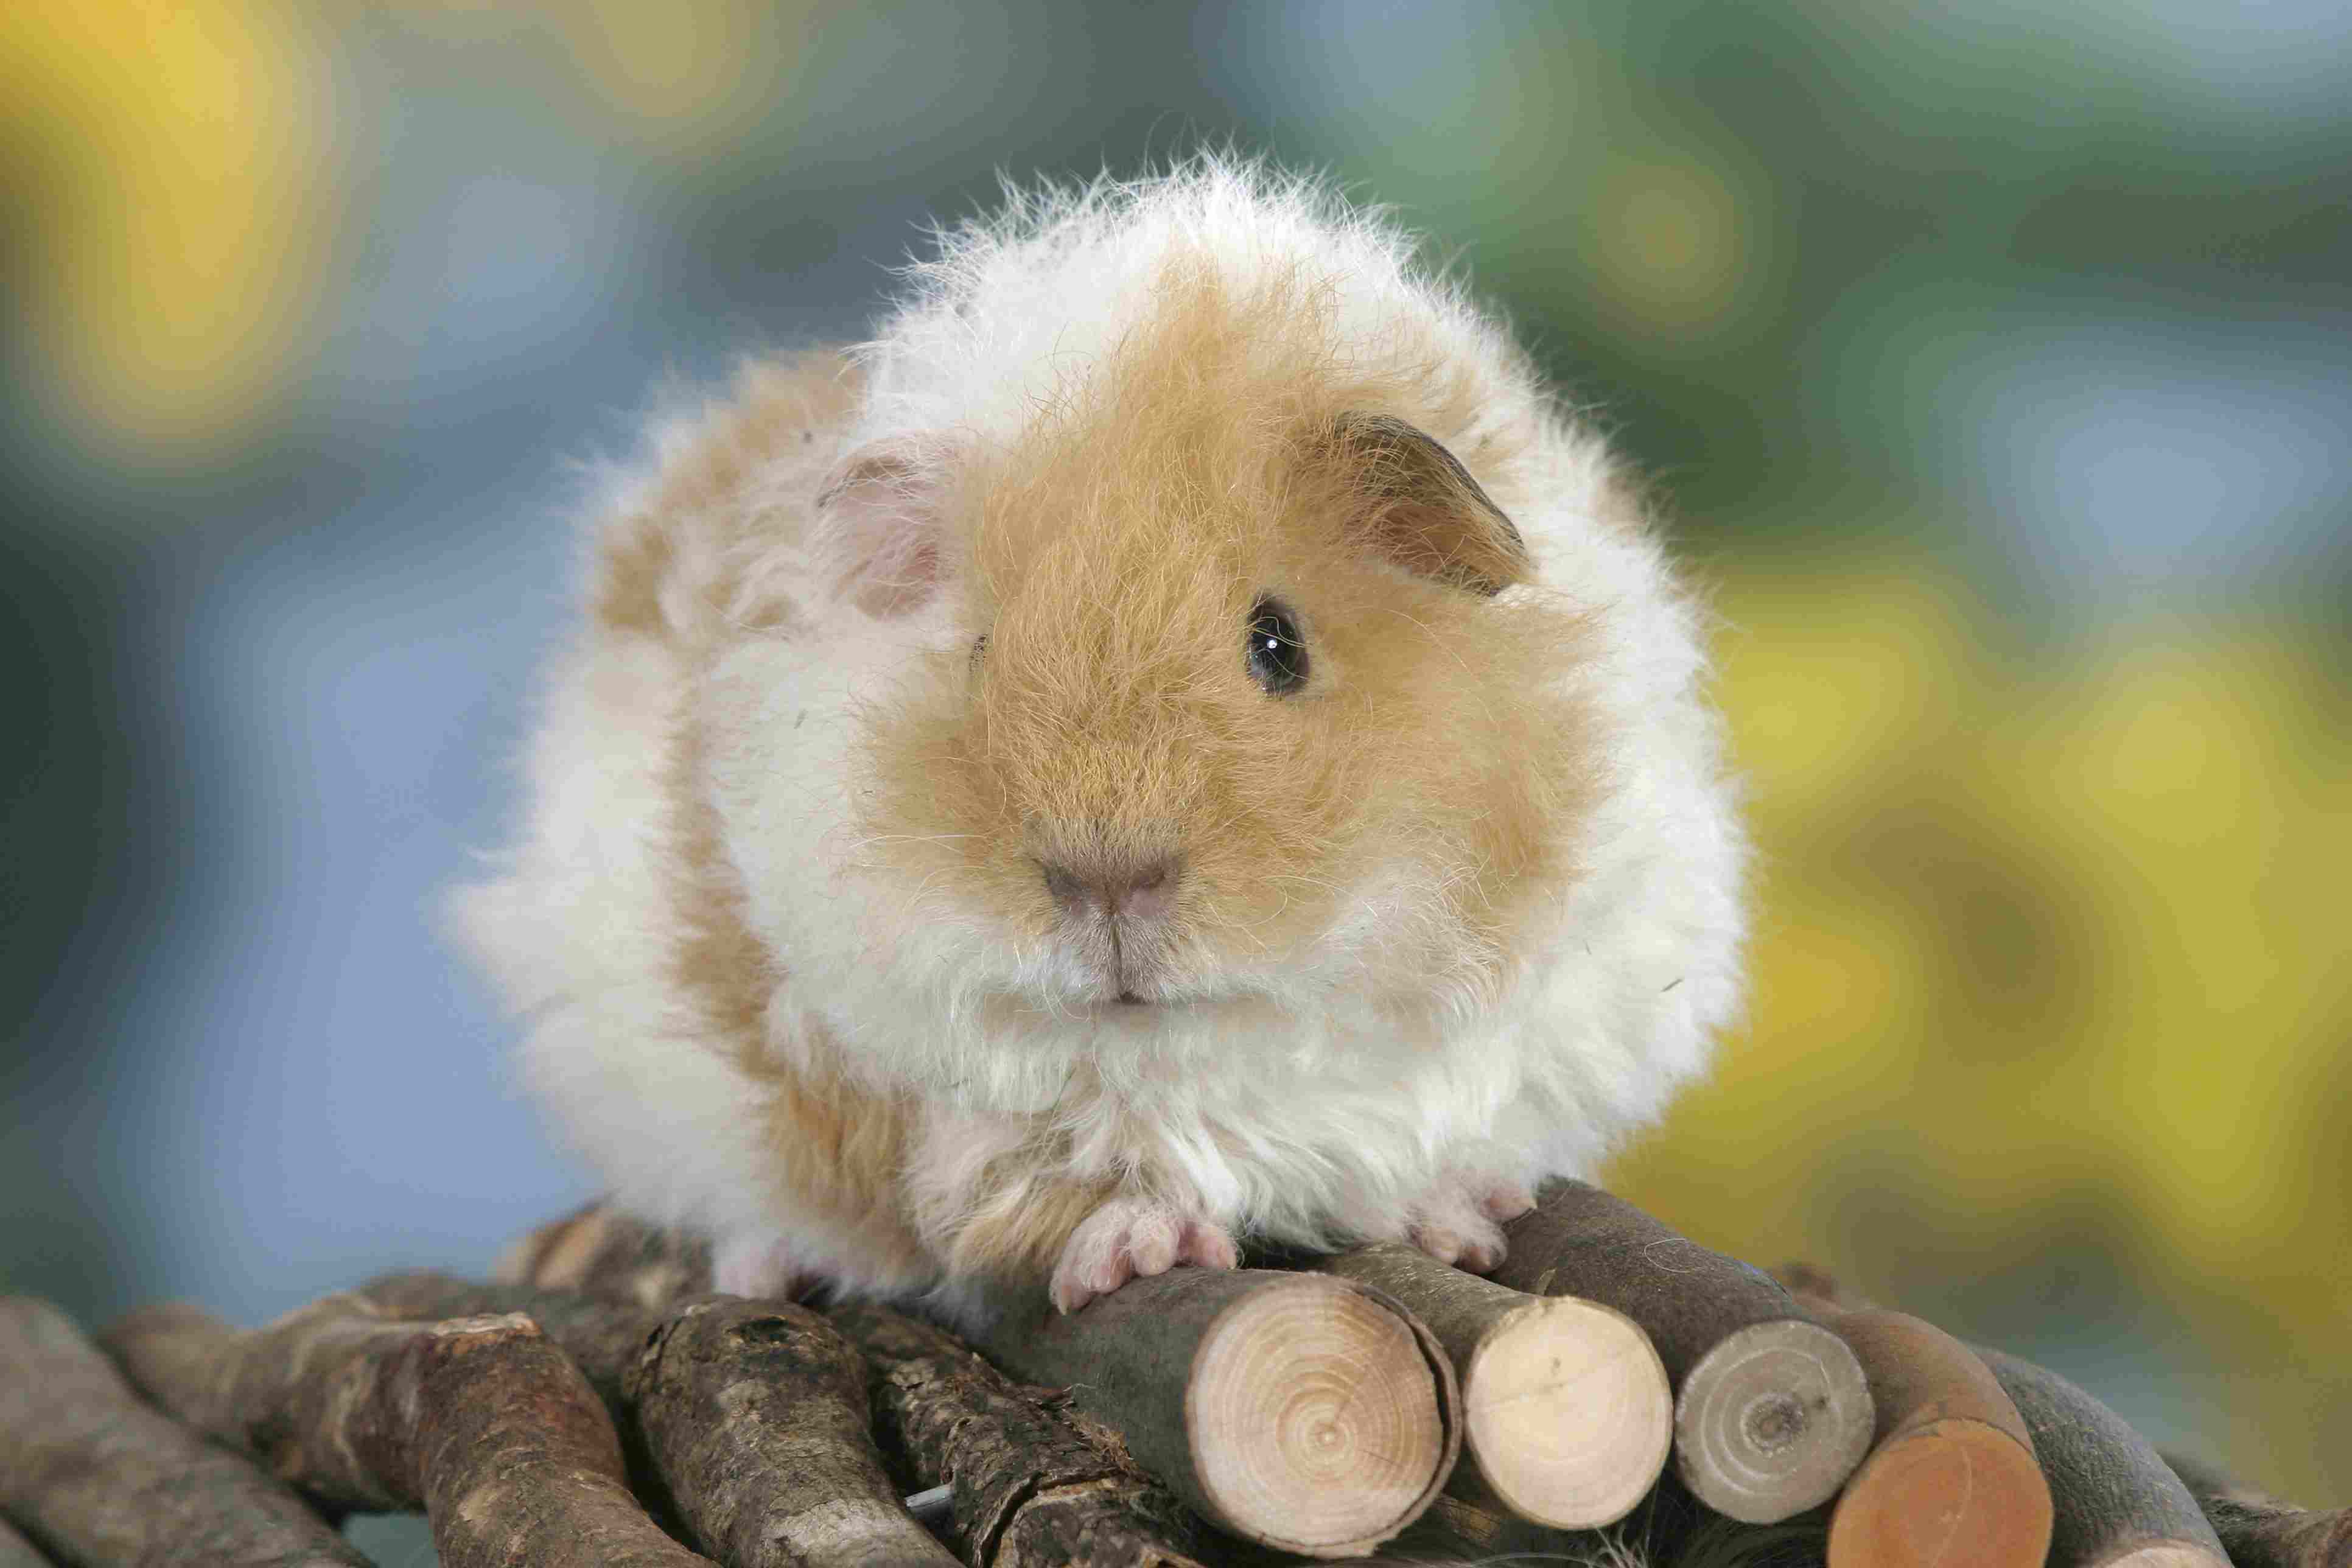 A buff and white texel guinea pig